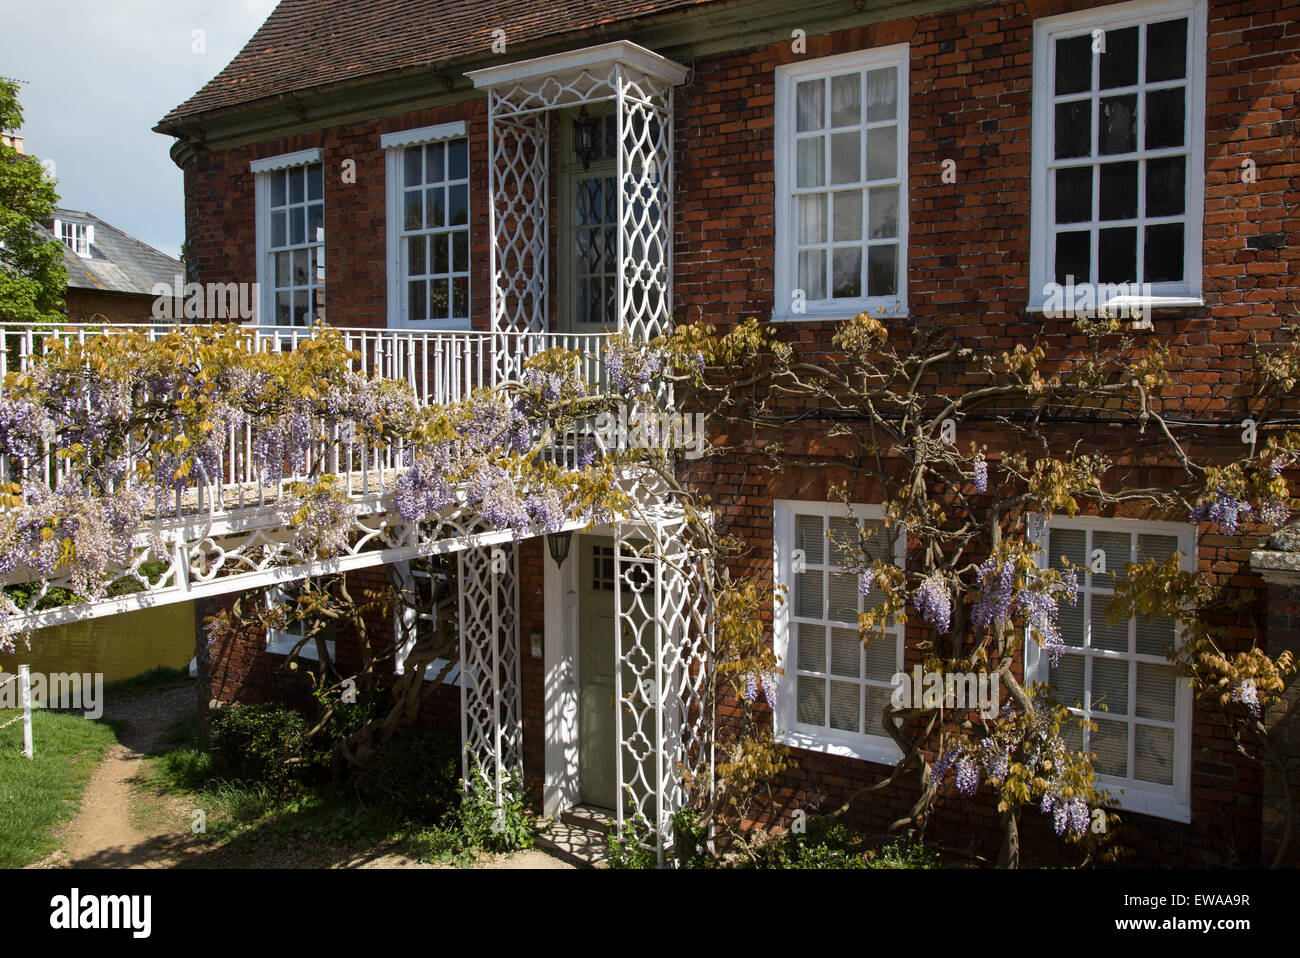 Wisteria plant in flower in garden of historic private home, Hungerford, Berkshire, England, UK Stock Photo